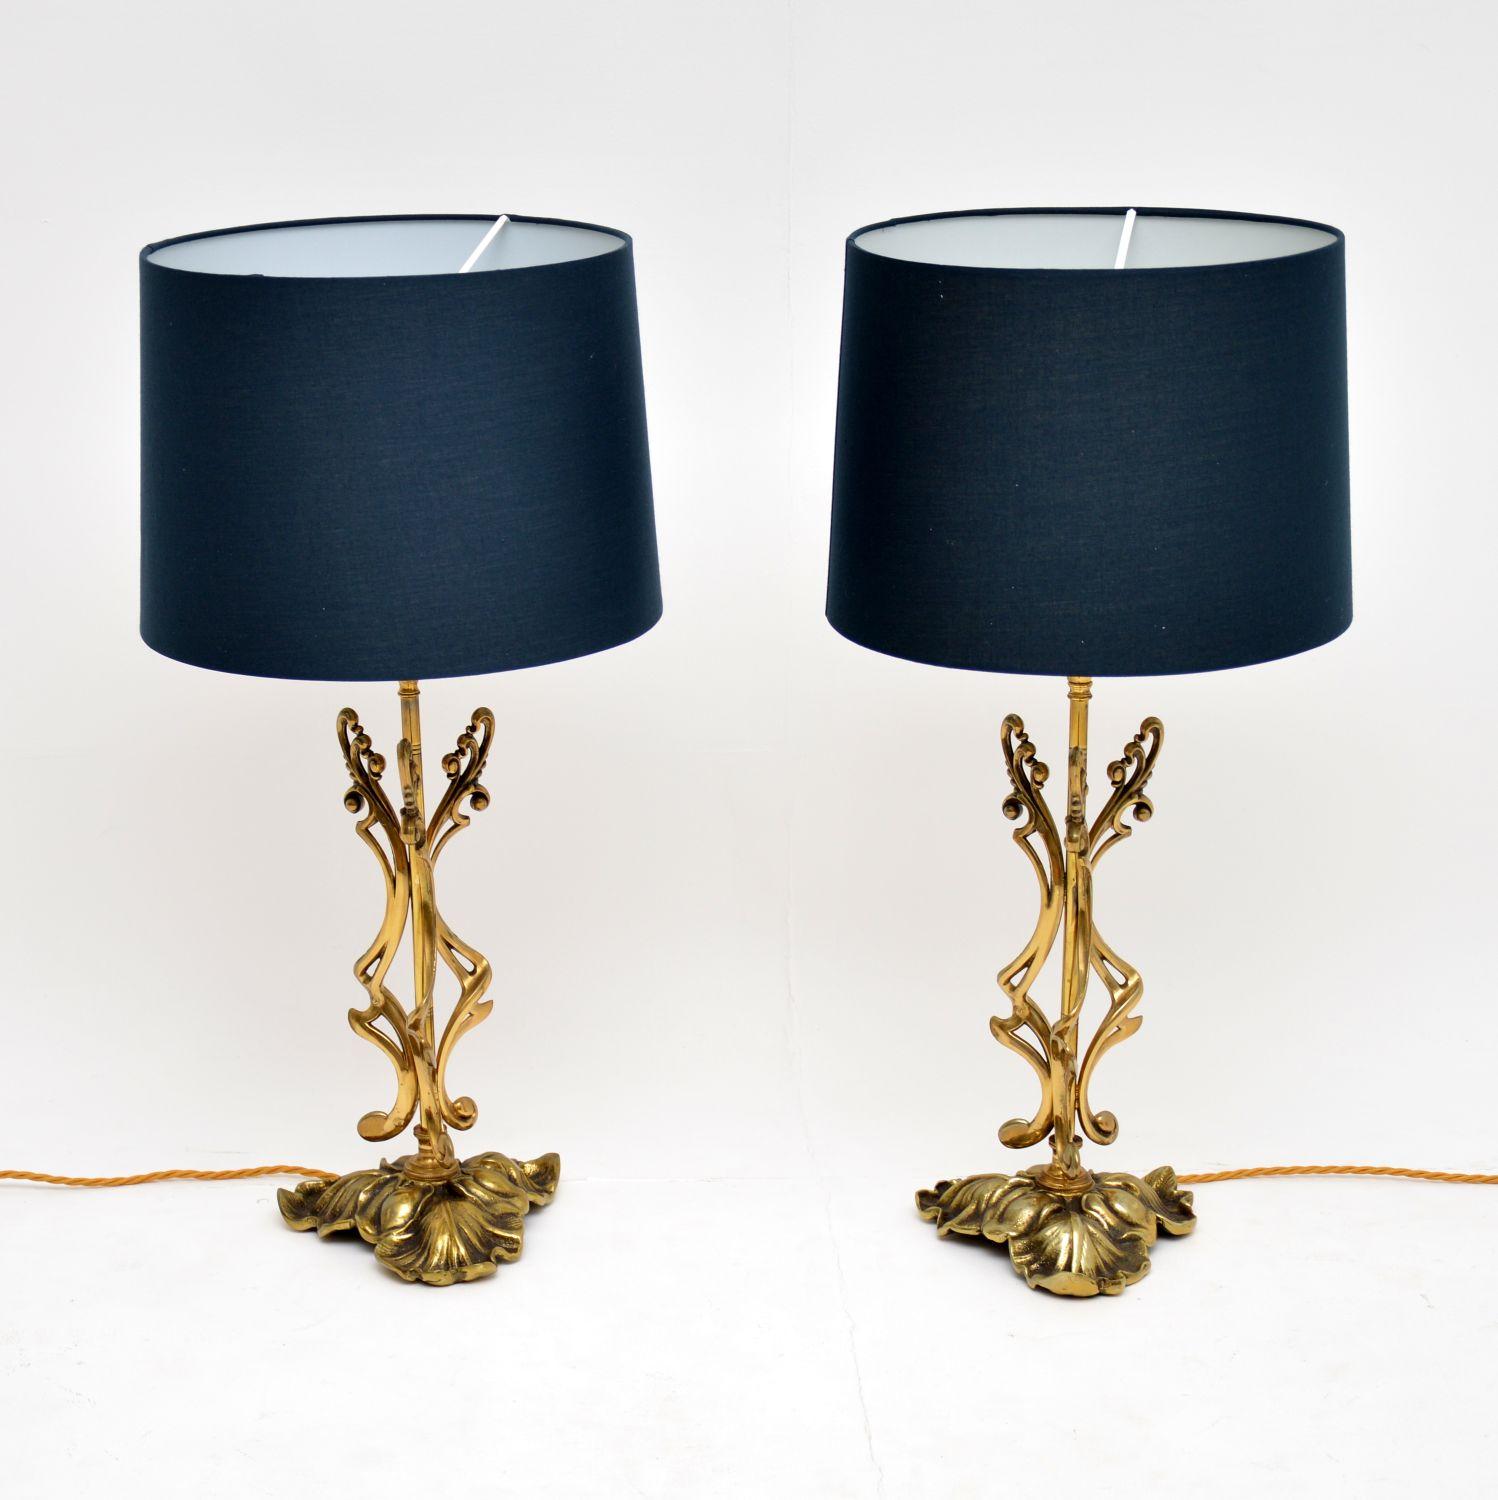 A stunning pair of vintage decorative brass table lamps in the Art Nouveau style, made in Italy and dating from circa 1970s. The quality is fantastic, the have a beautiful and ornate floral design. They are in excellent vintage condition, with only